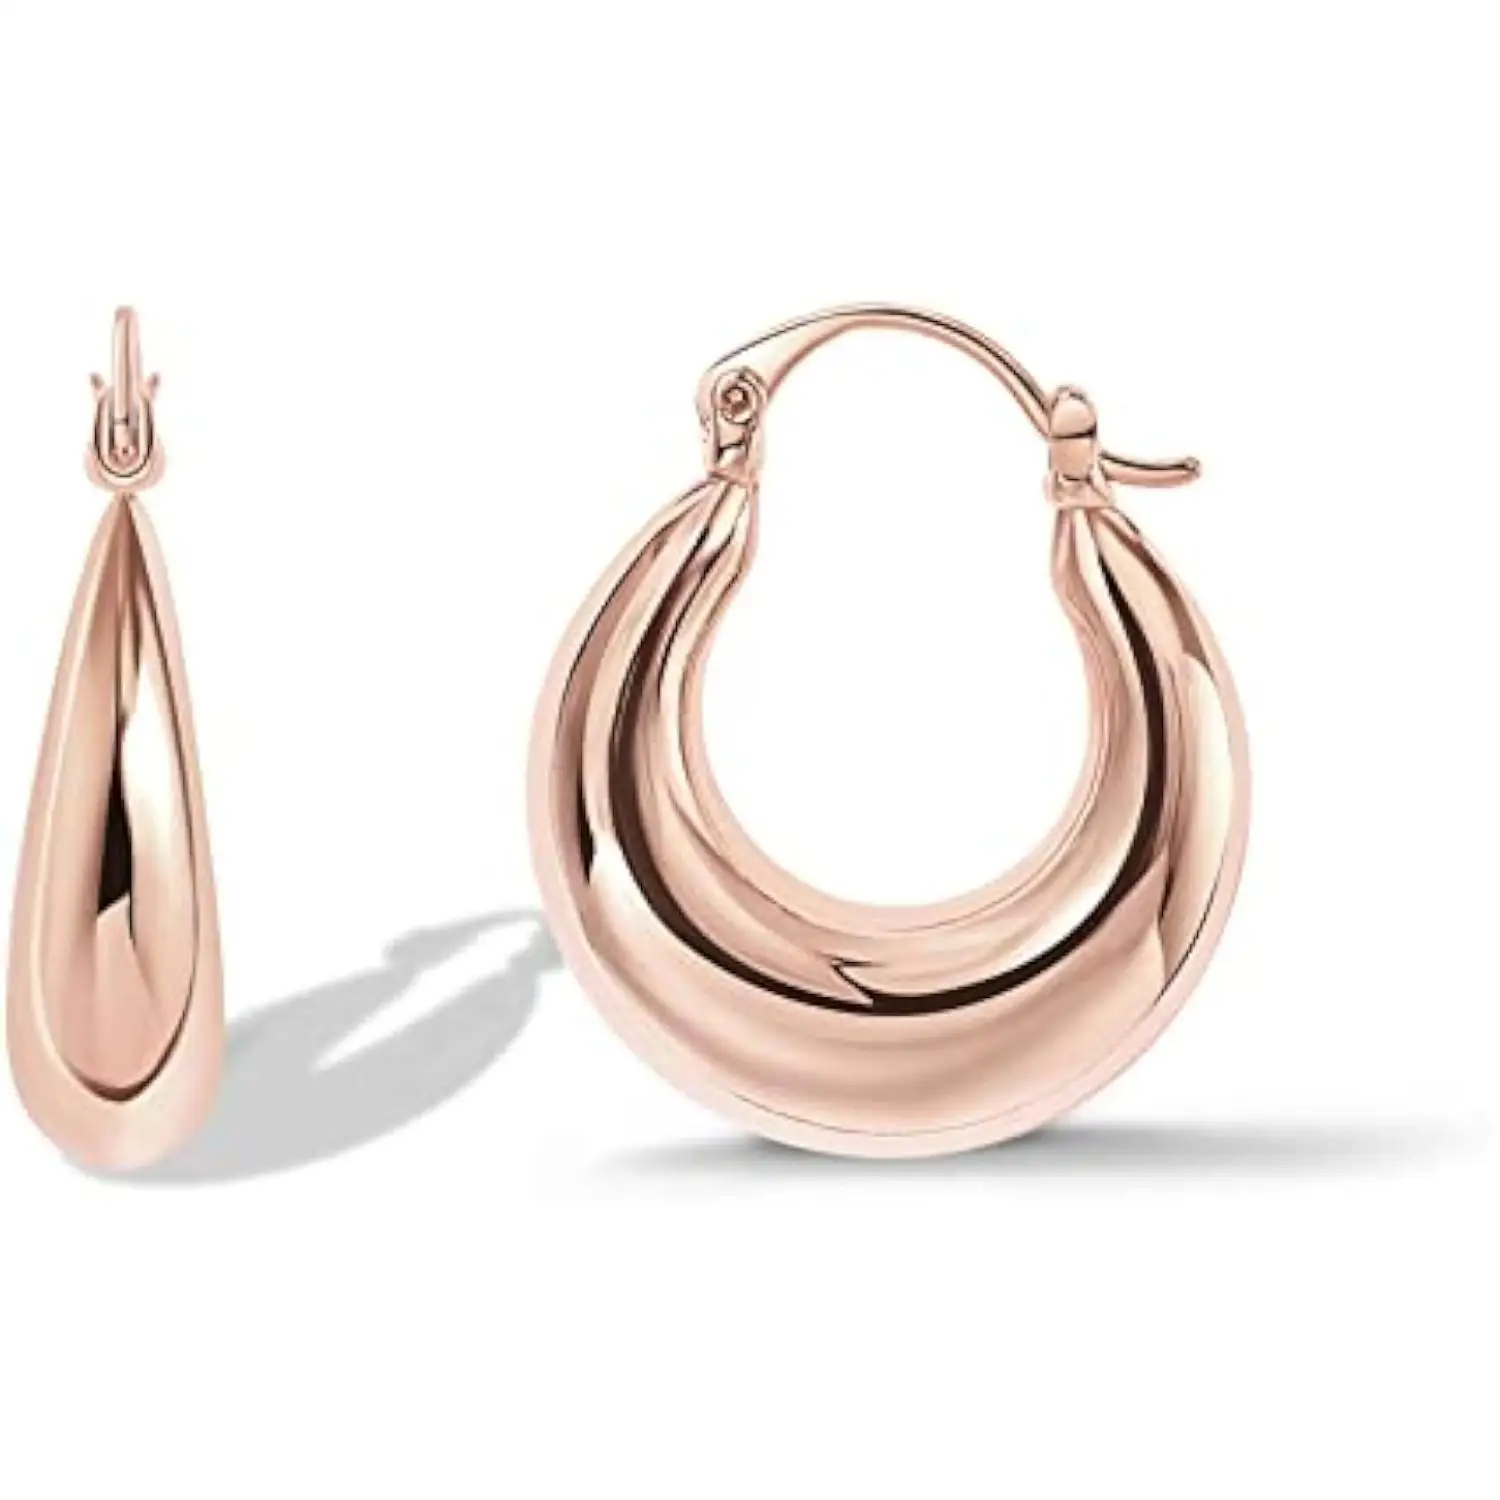 

FANSILVER Rose Gold Earrings for Women - 14K Plated Sterling Silver Chunky Hoops, Lightweight and Hypoallergenic